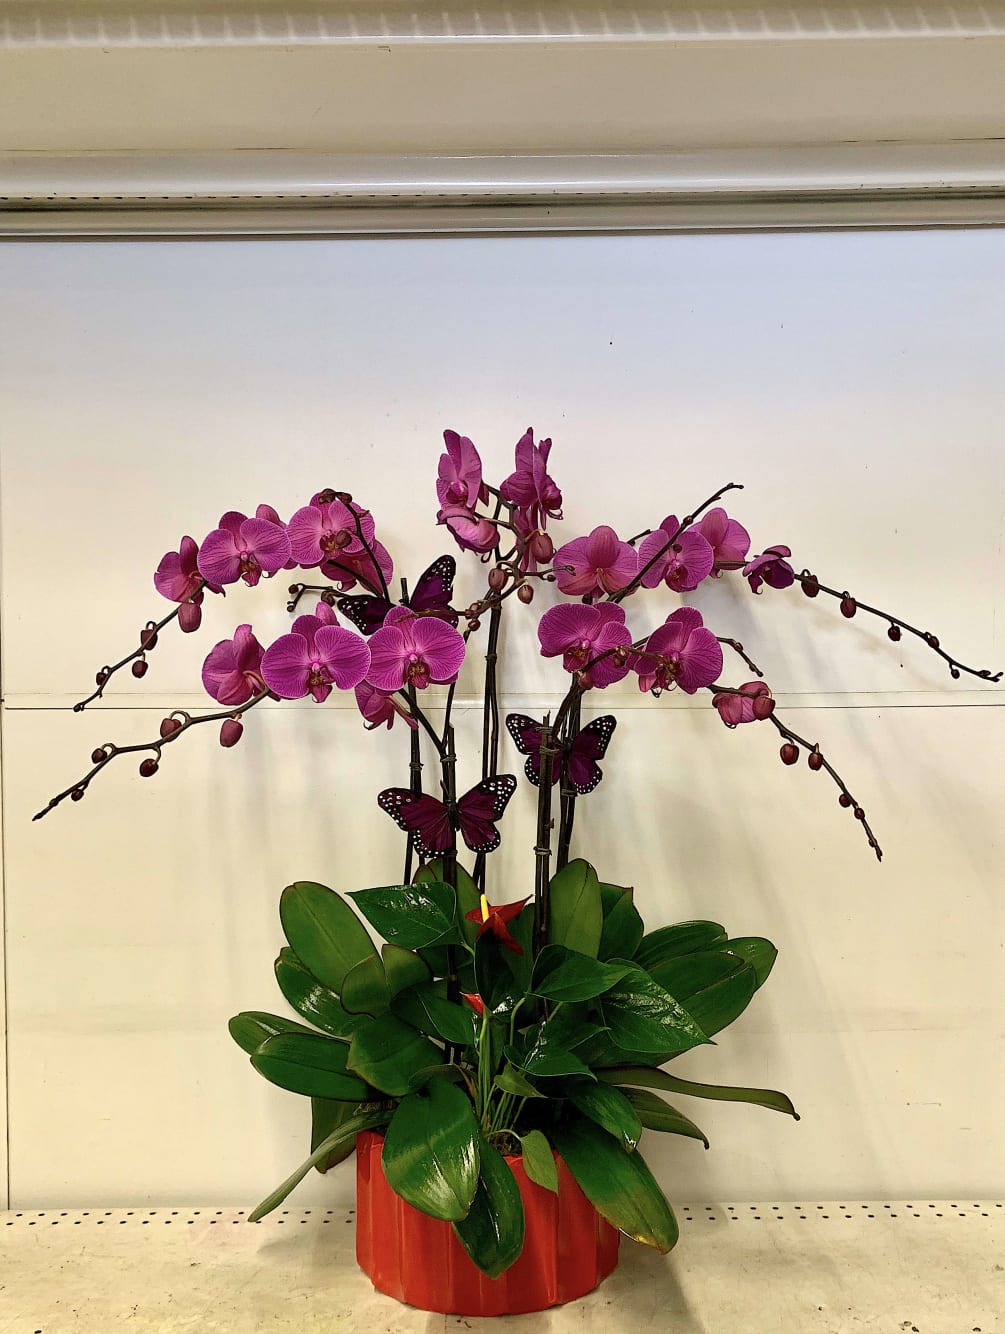 Amazing pop of color with the purple orchids and red anthurium in